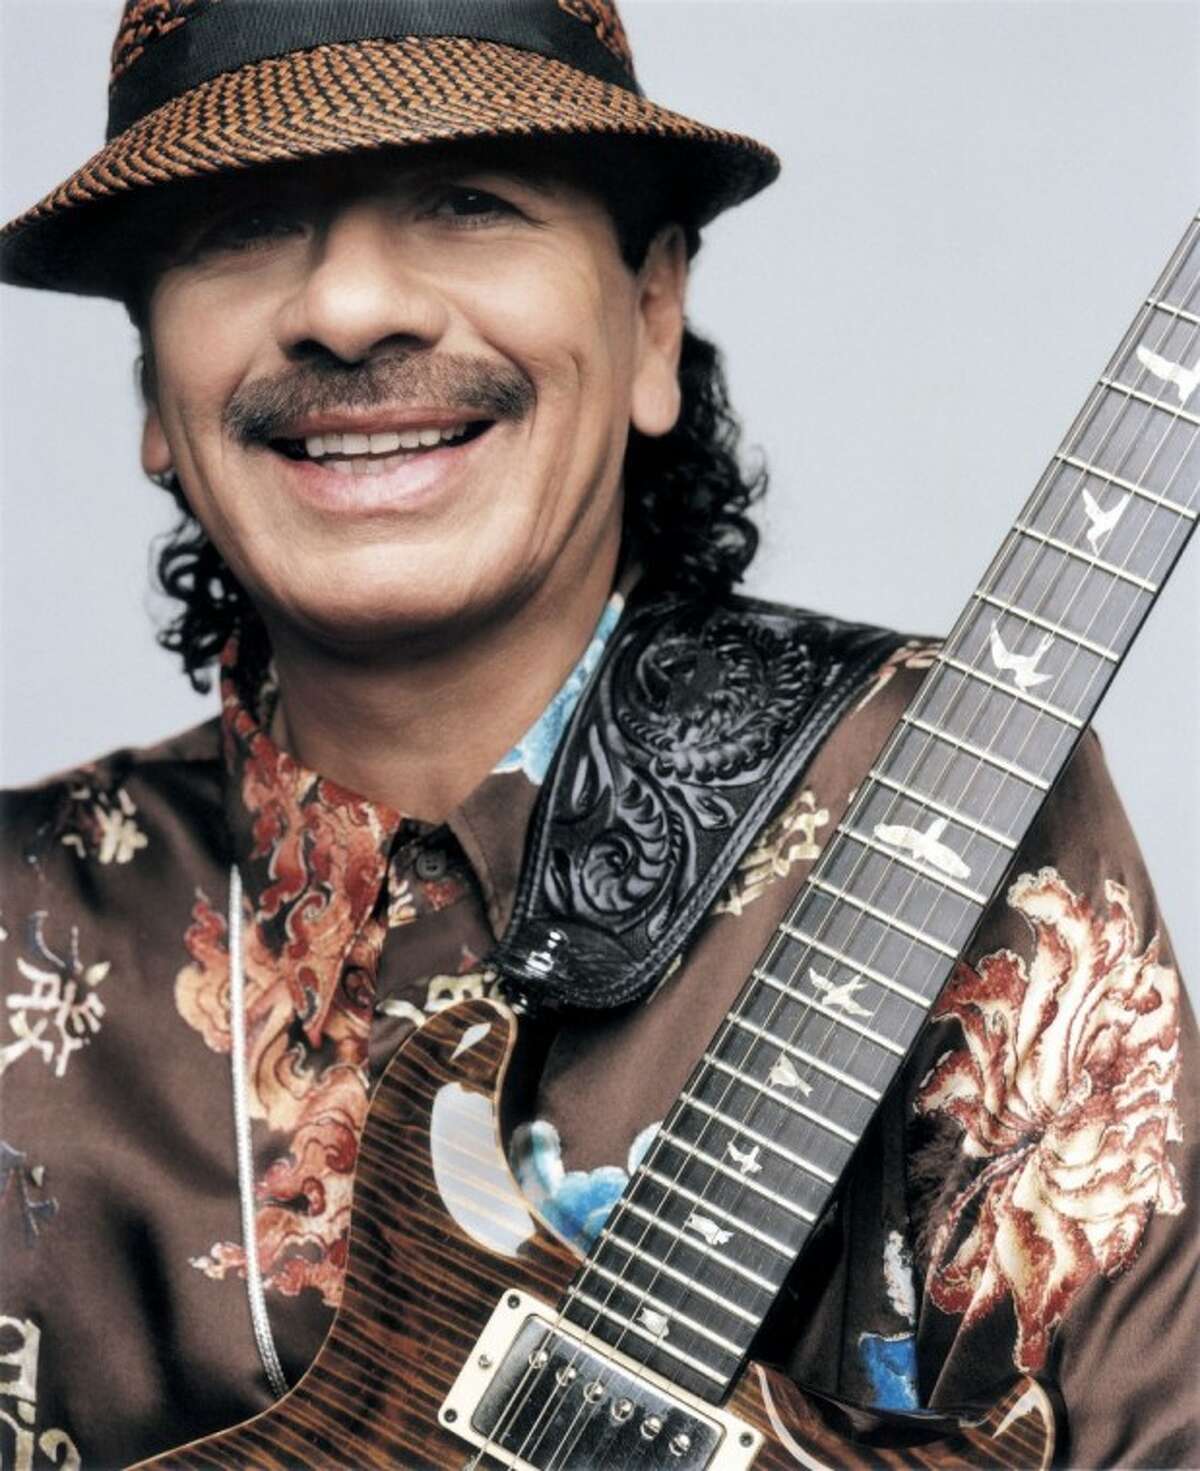 Carlos Santana headlines at the Cynthia Woods Mitchell Pavilion Saturday. Michael Franti and Spearhead open the show.